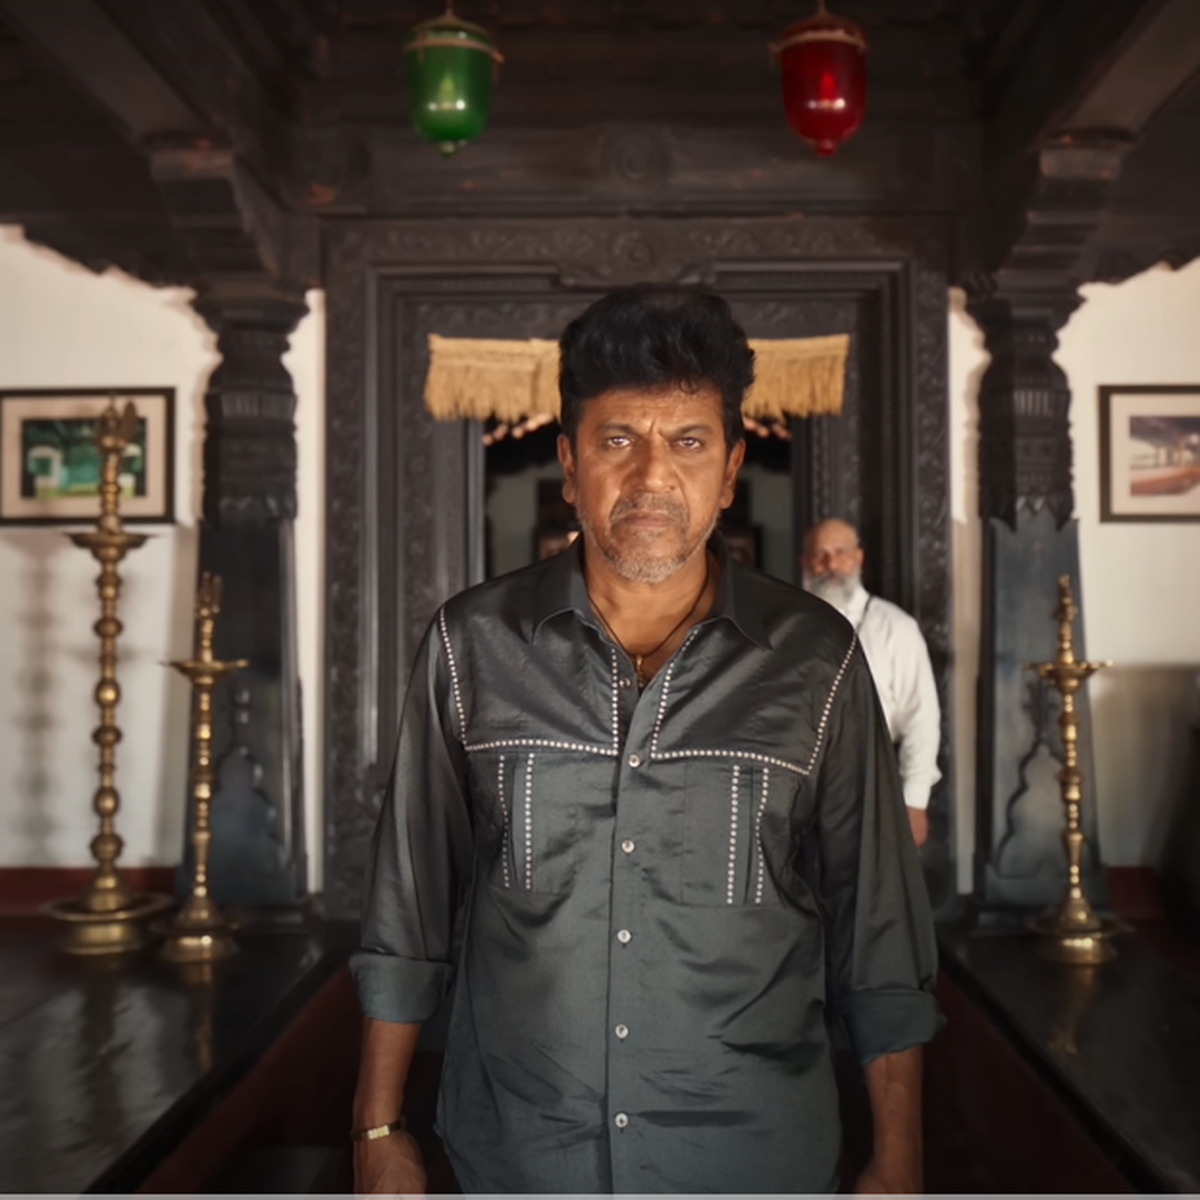 Ghost' movie review: Shivarajkumar shines in a potent yet